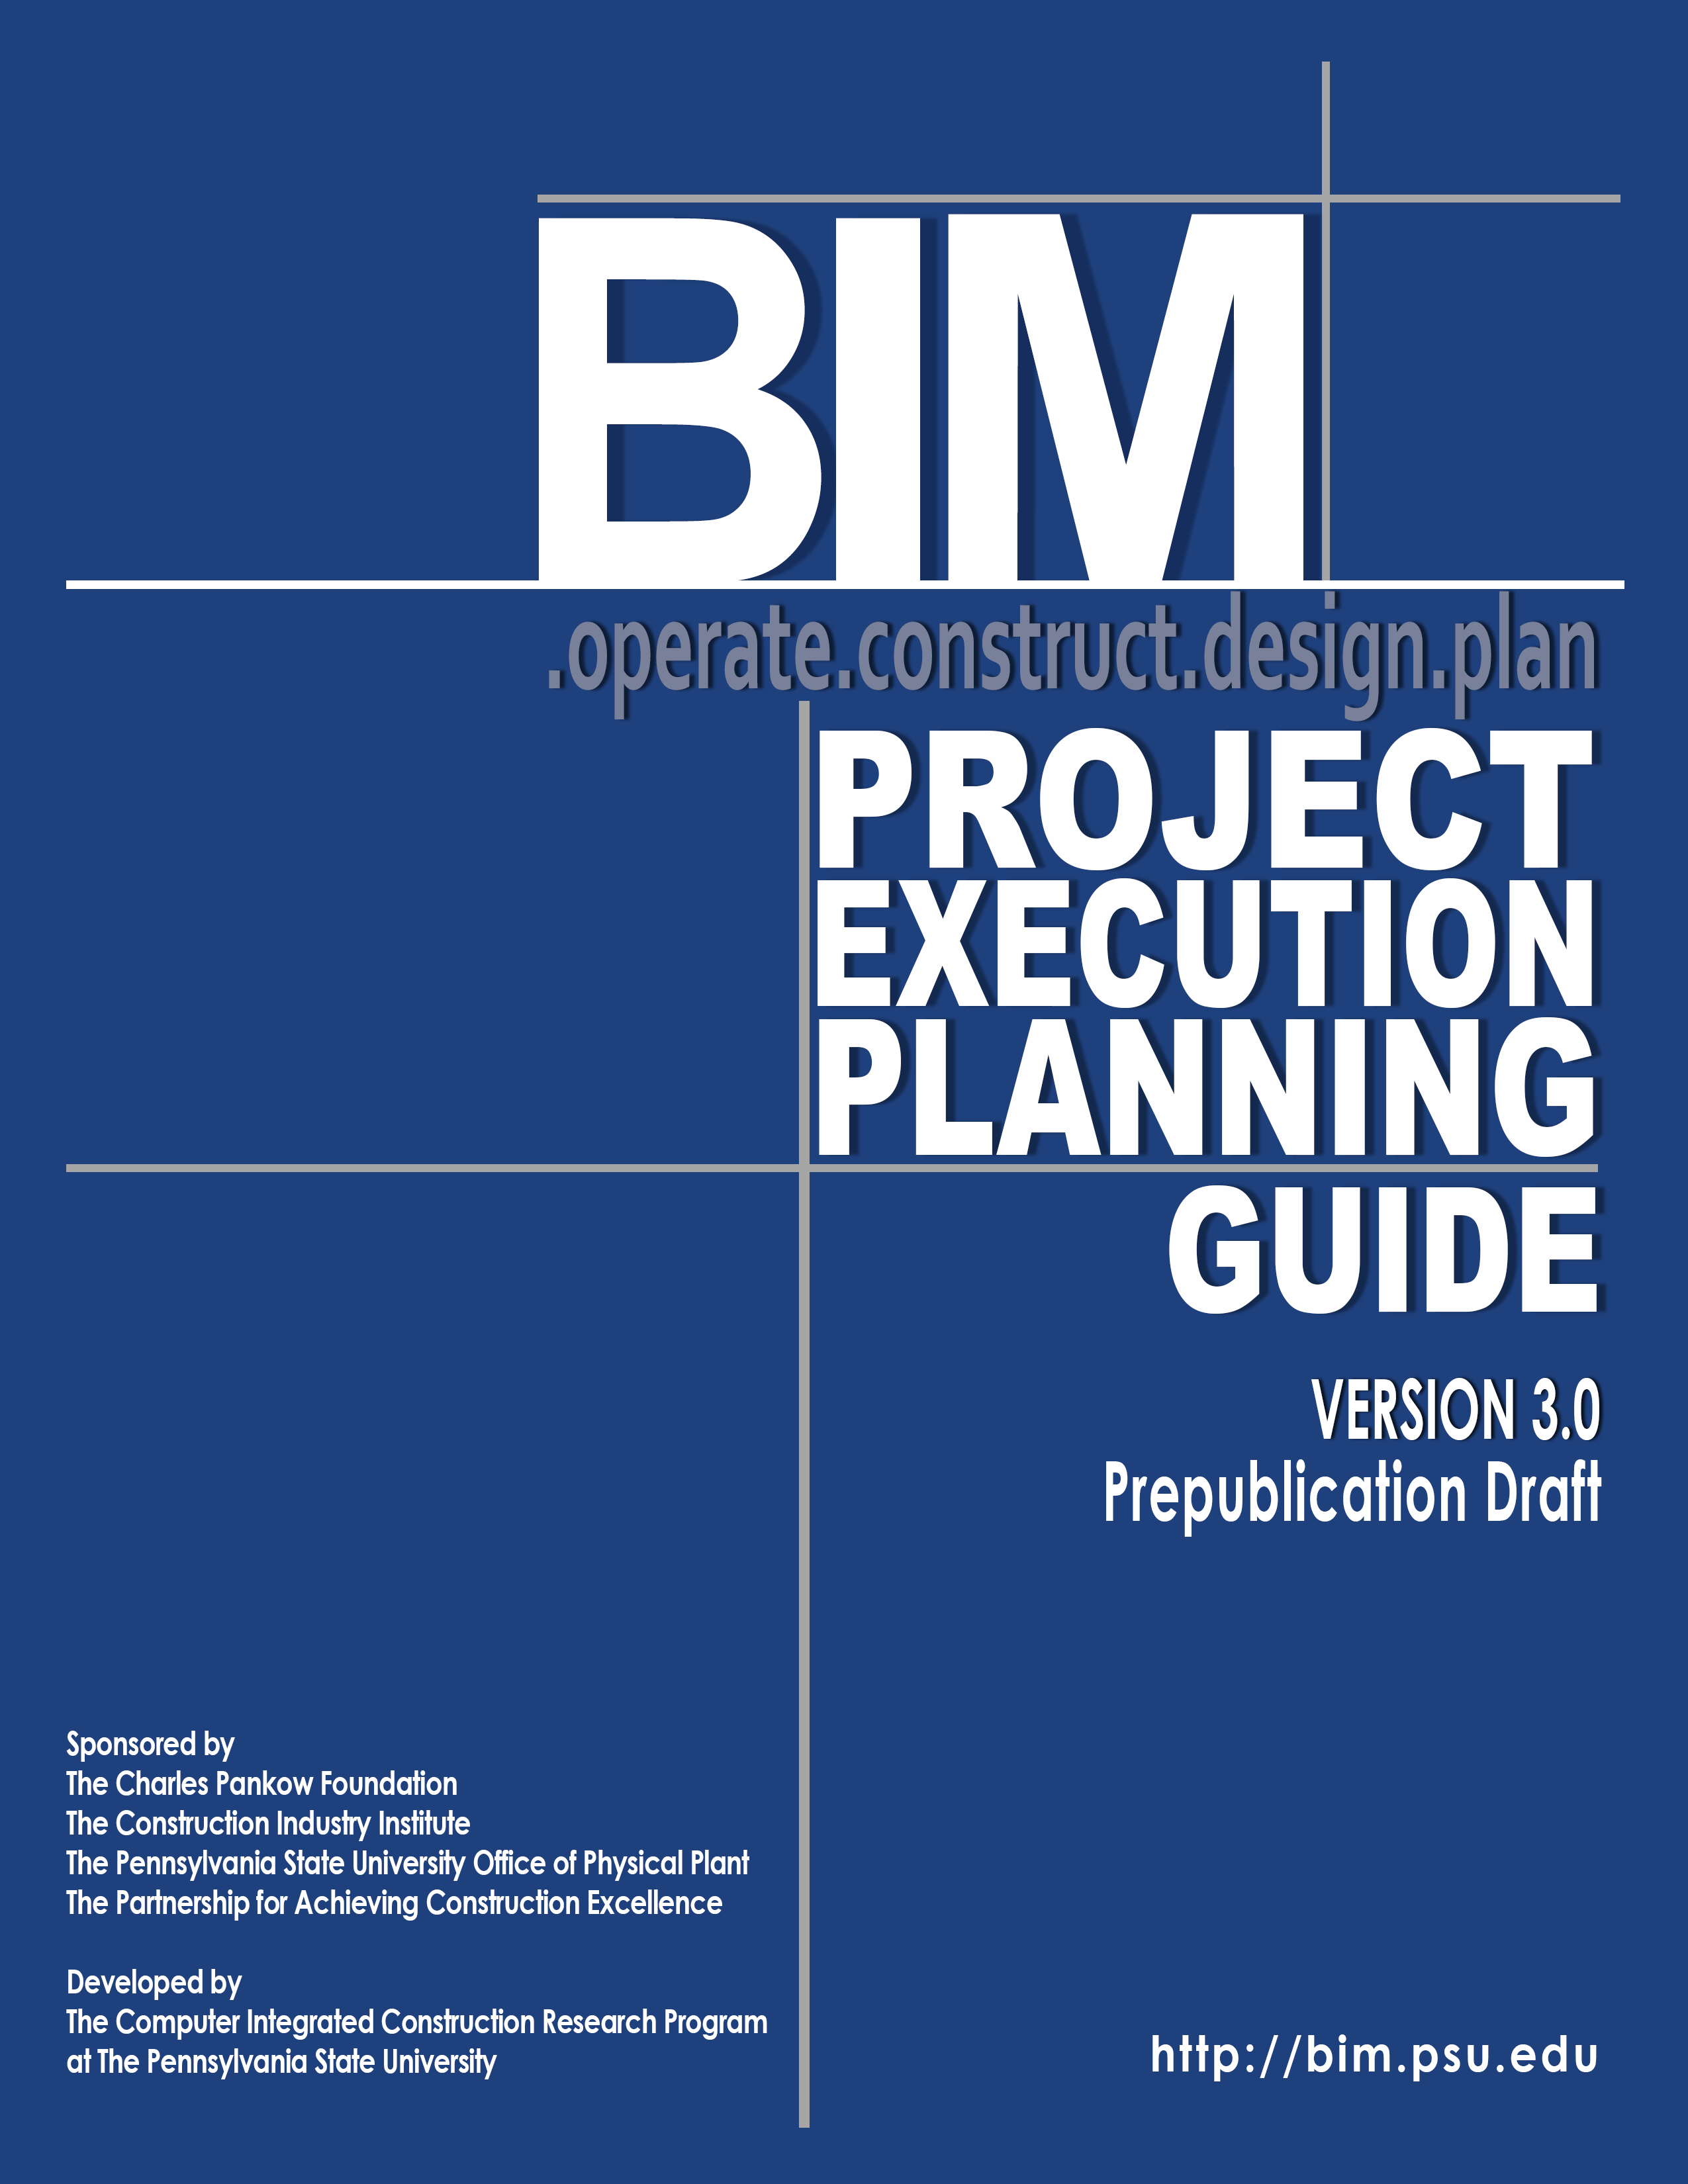 Cover image for BIM Project Execution Planning Guide, Version 3.0